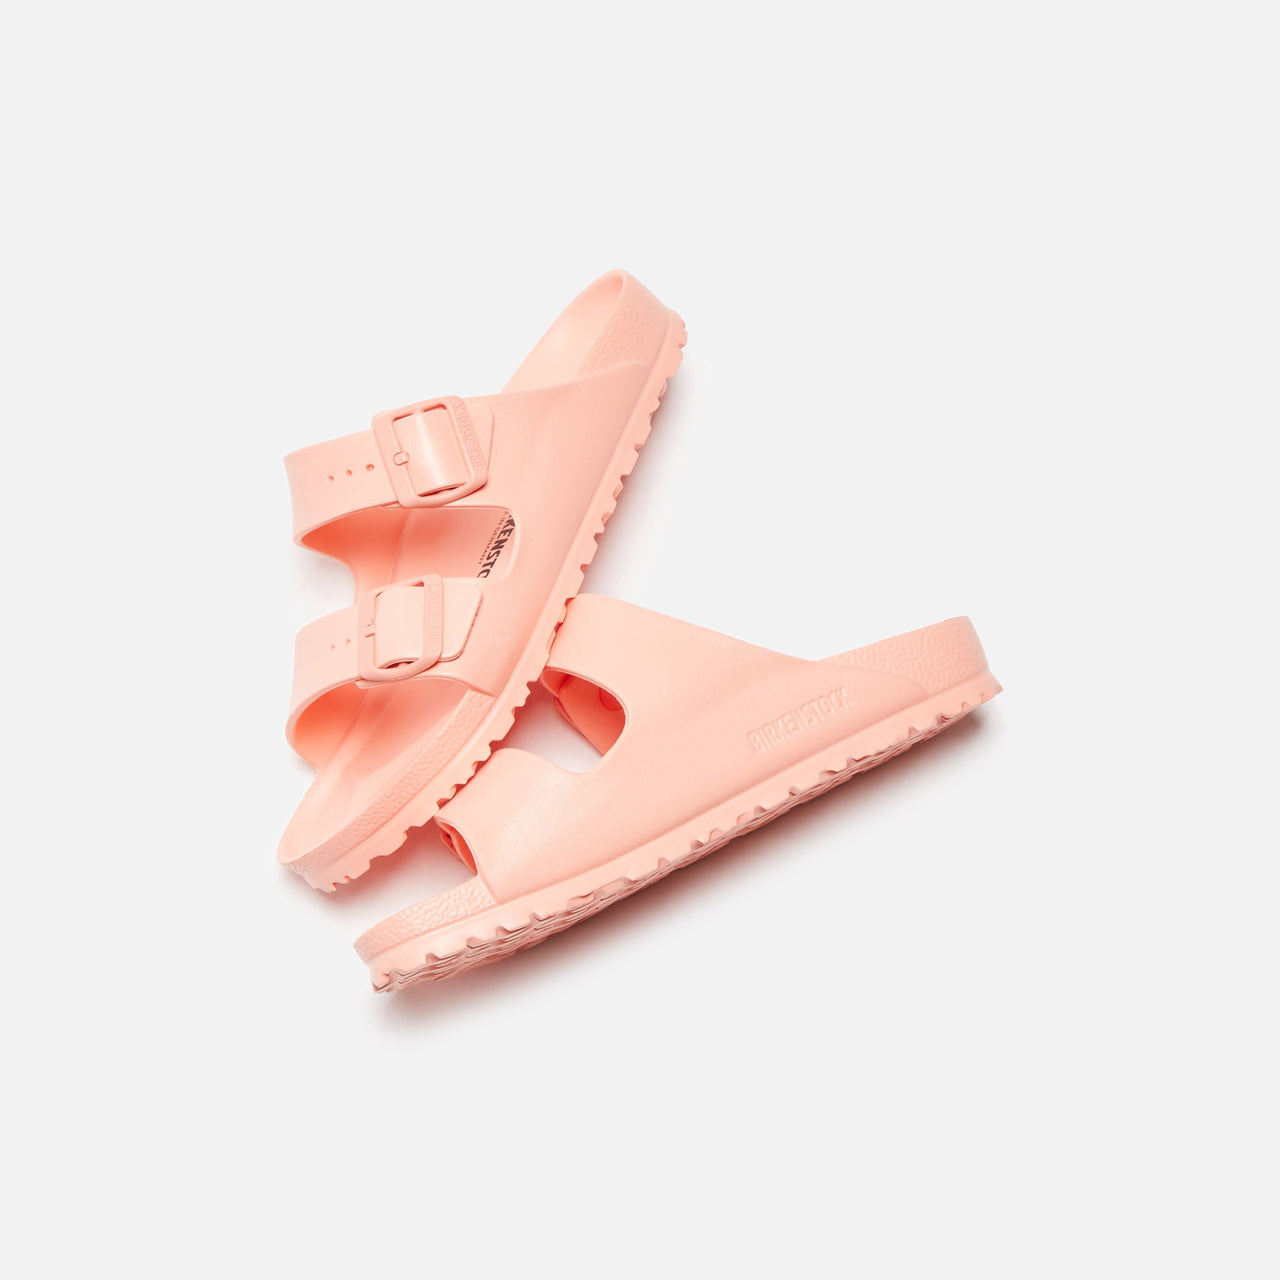 Birkenstock Women's Arizona Eva Coral Peach sandals, perfect for summer outings